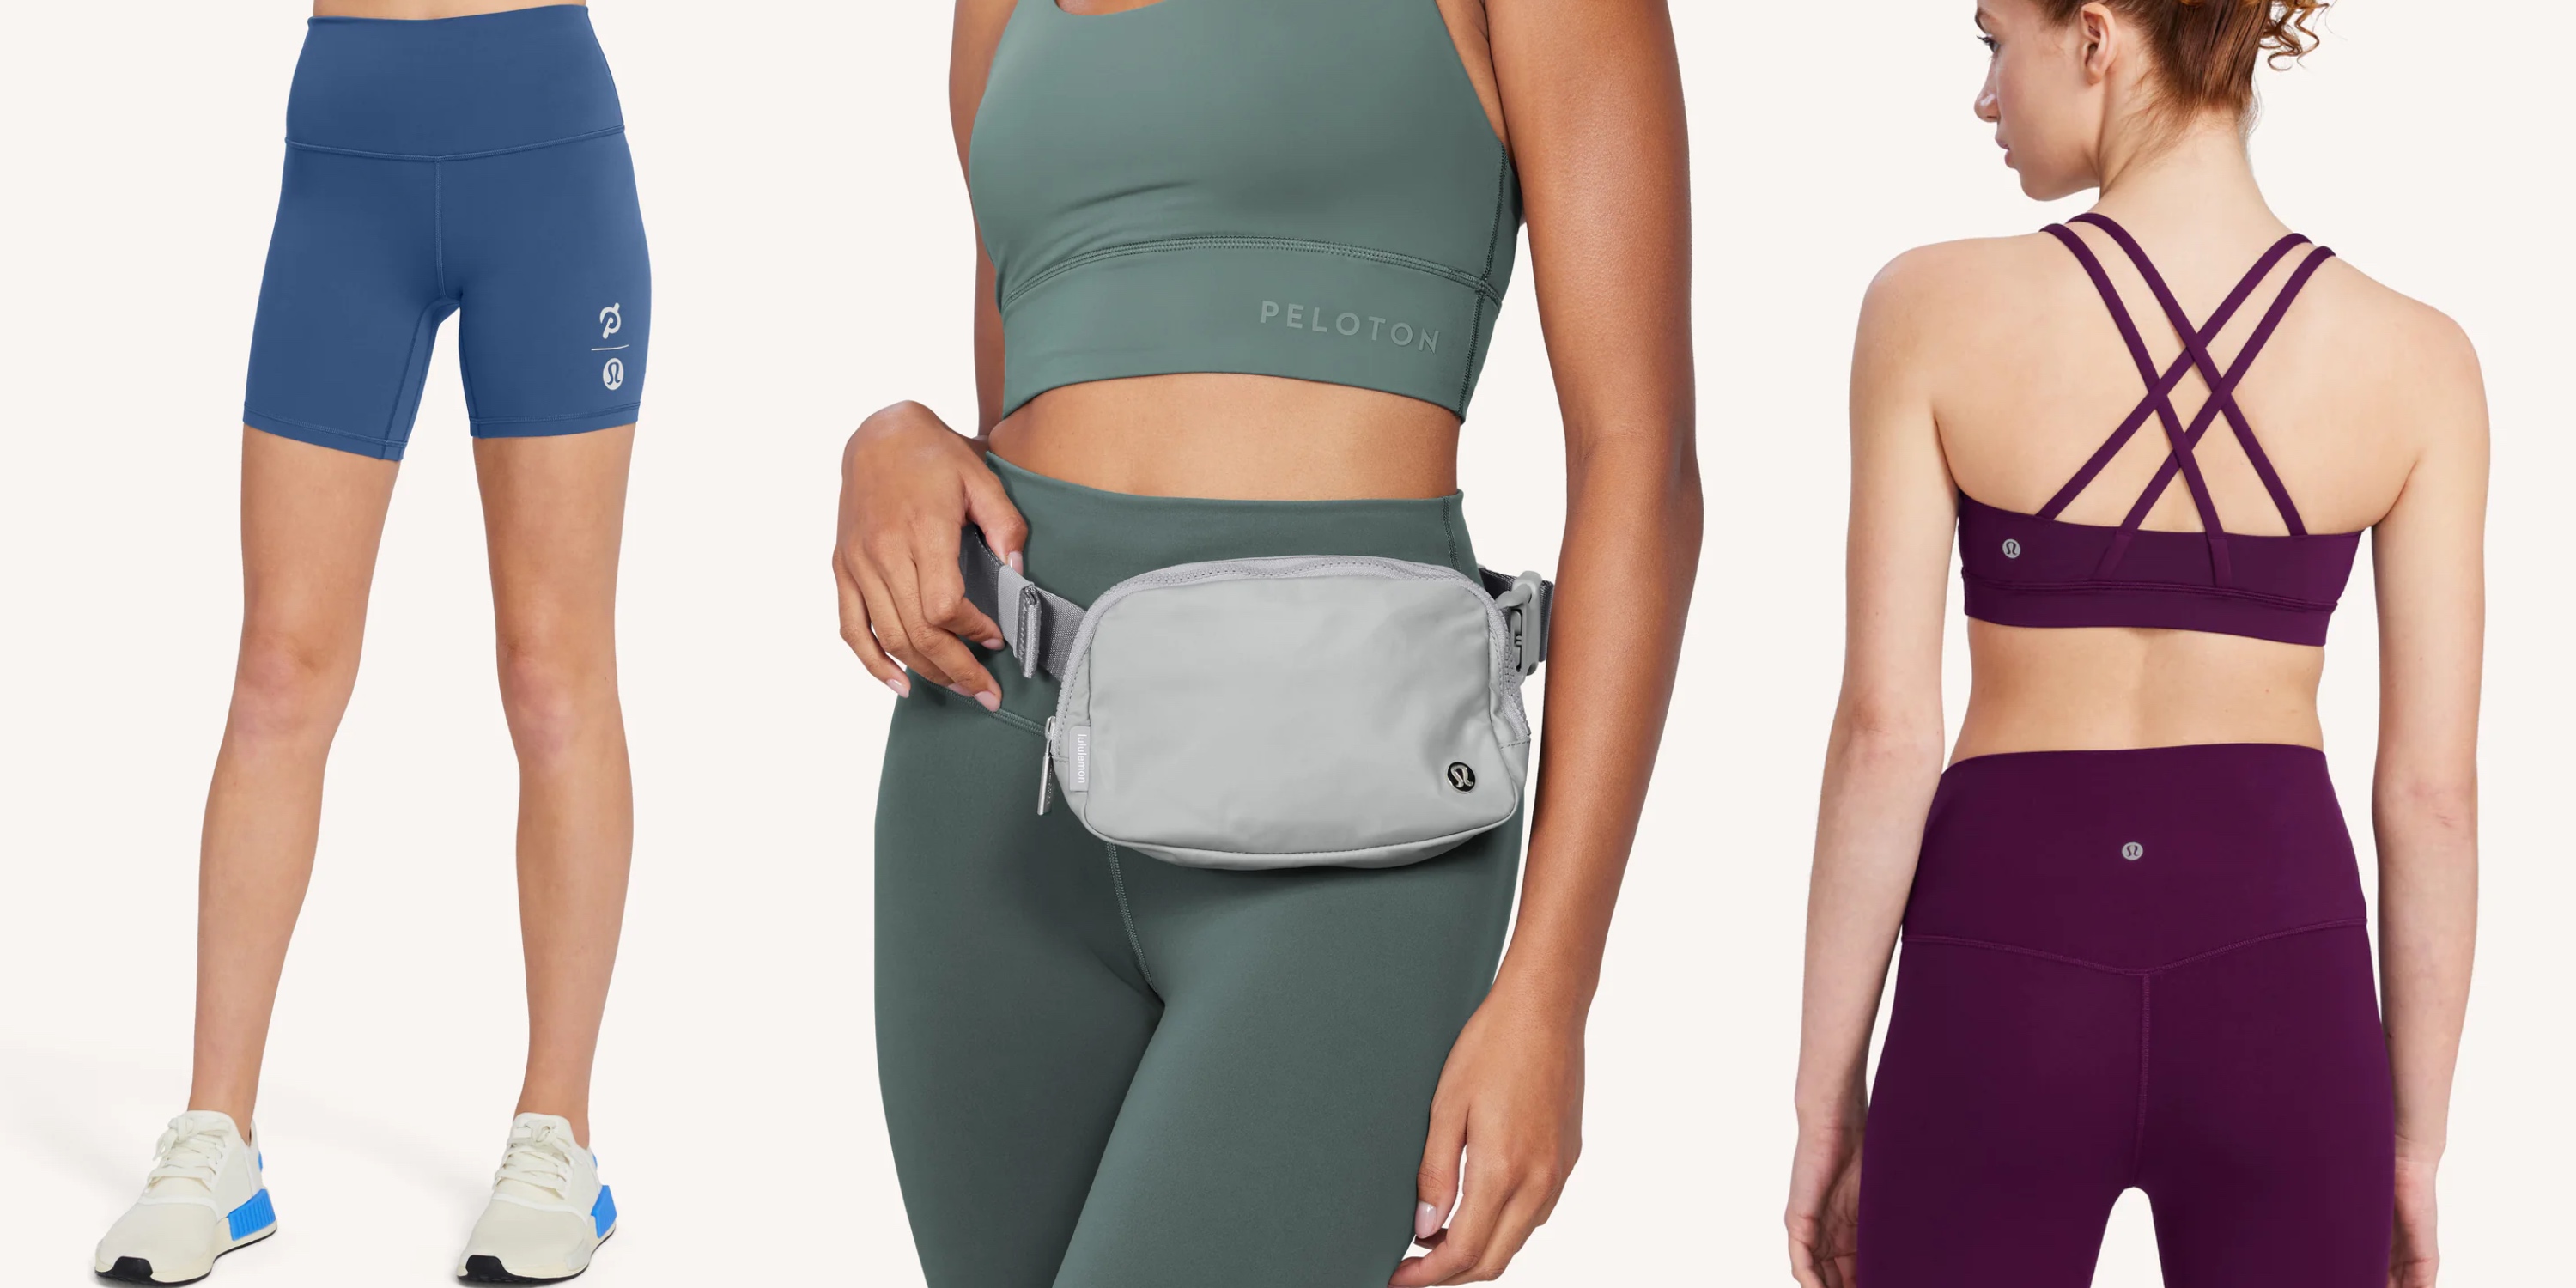 Peloton launches new 'Peloton x Lululemon' collection, what to